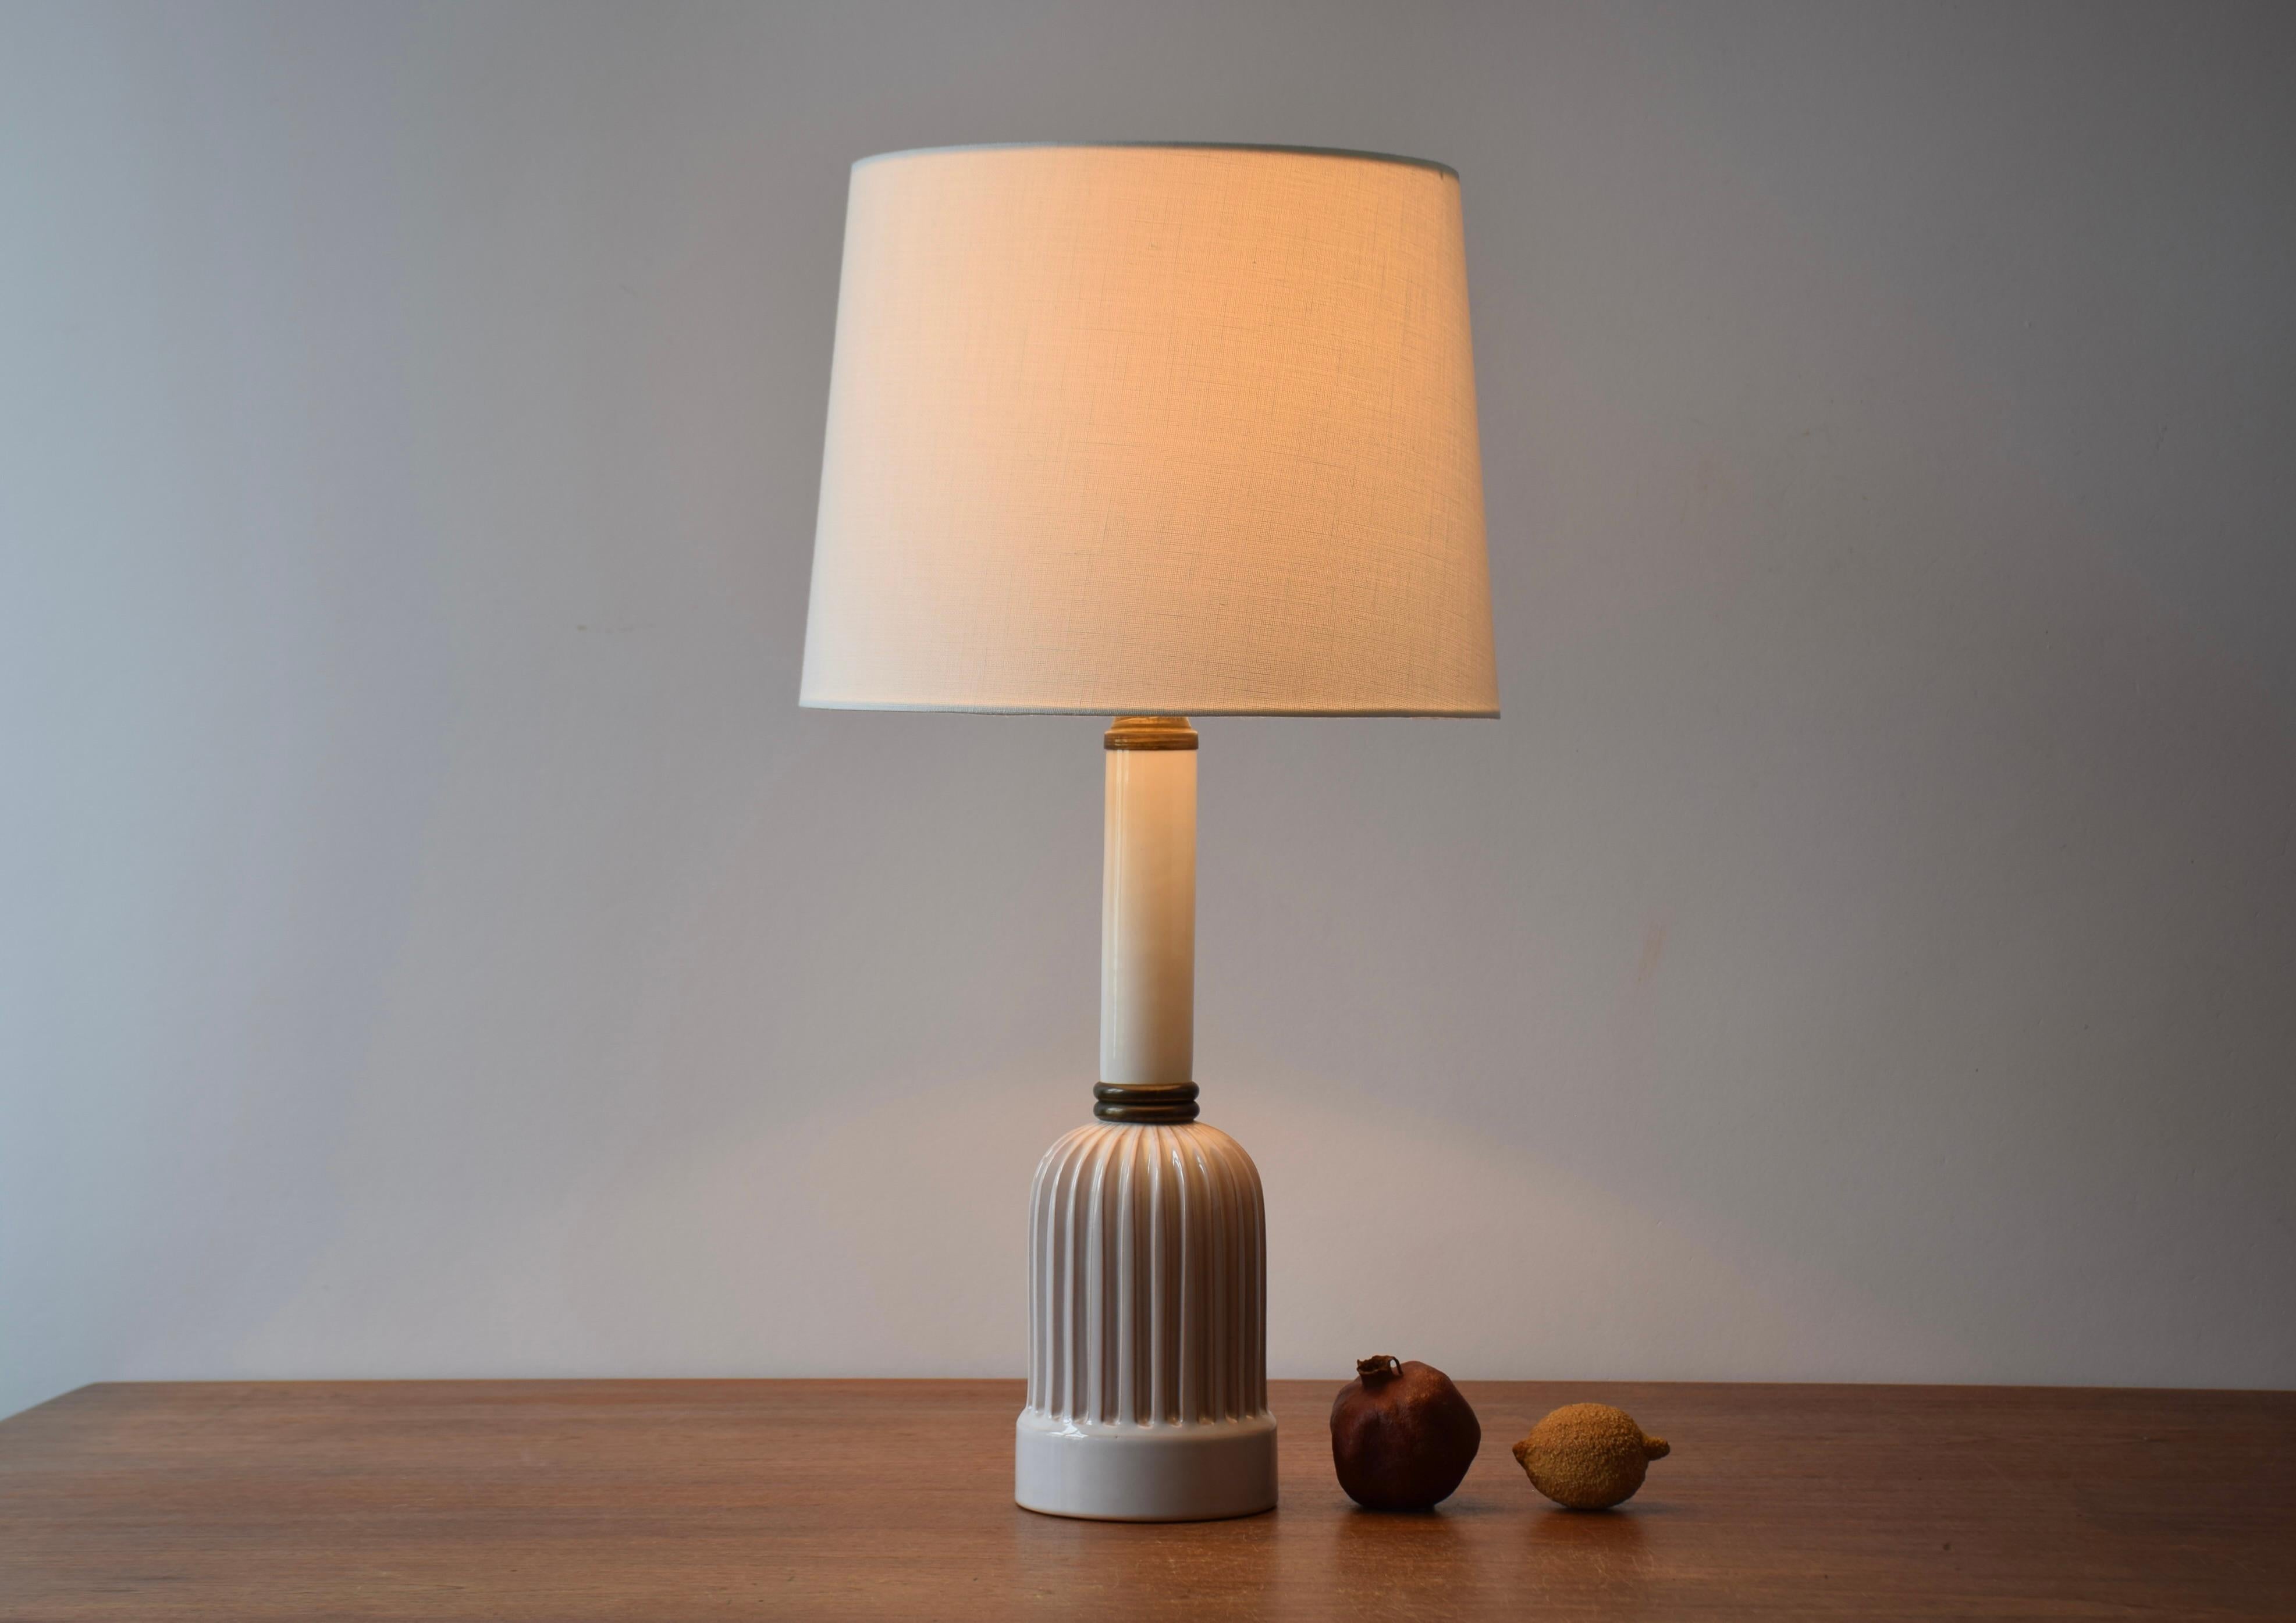 Vintage Danish ceramic table lamp with decorative grooved body. Made ca. 1950s.

The lamp is unsigned but it could be either from the ceramic workshop Schollert or Eslau or in the style of these workshops. It features their classical grooved